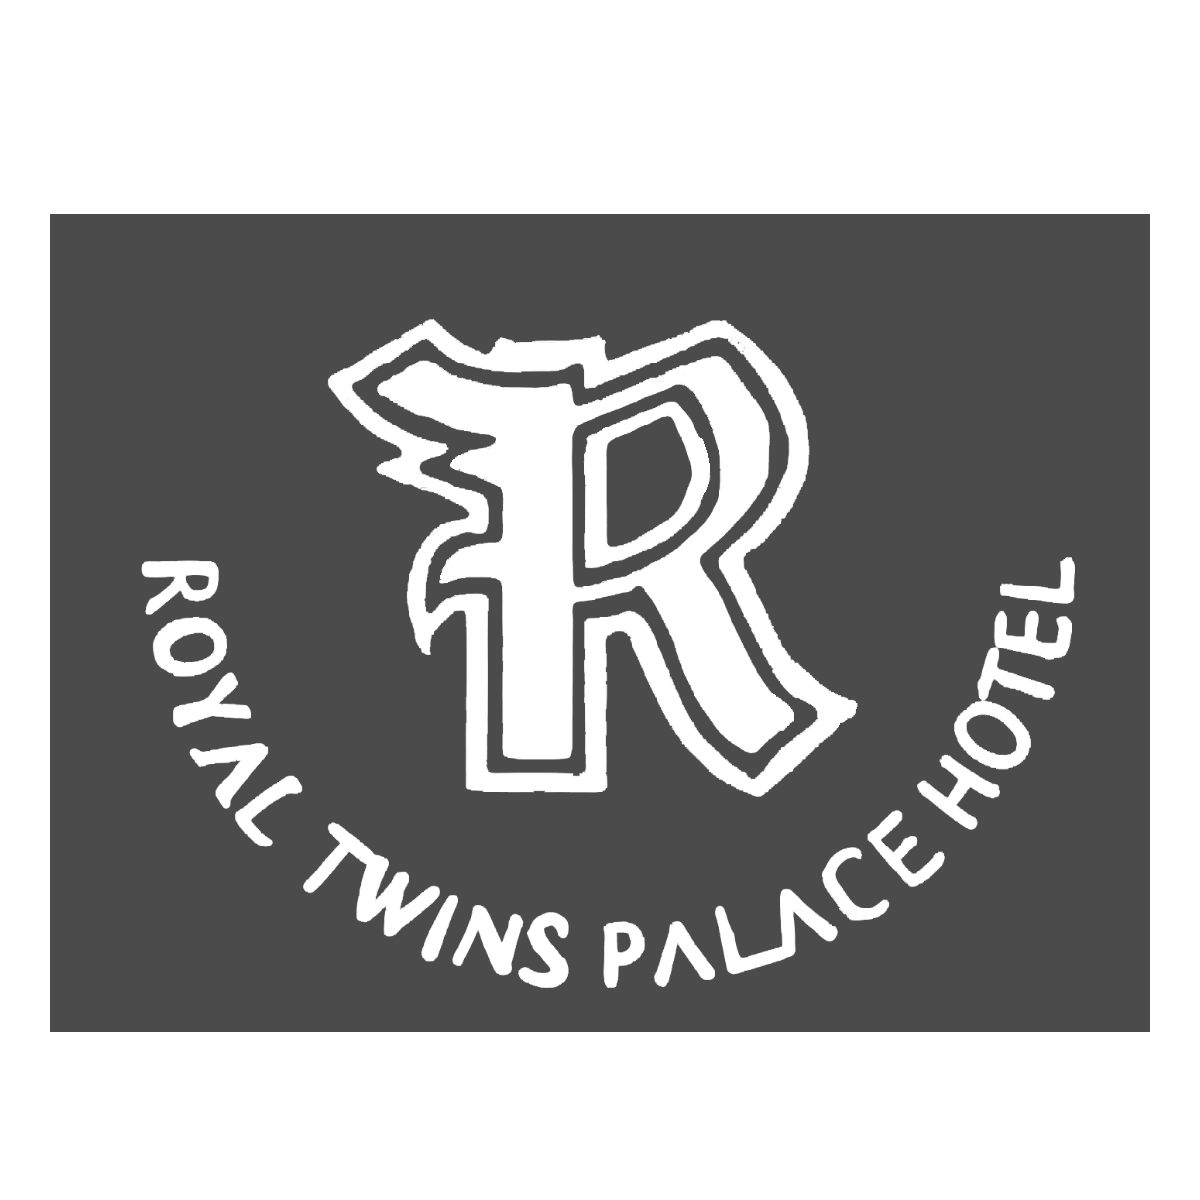 Royal_twins_palace_hotel_เทา.png